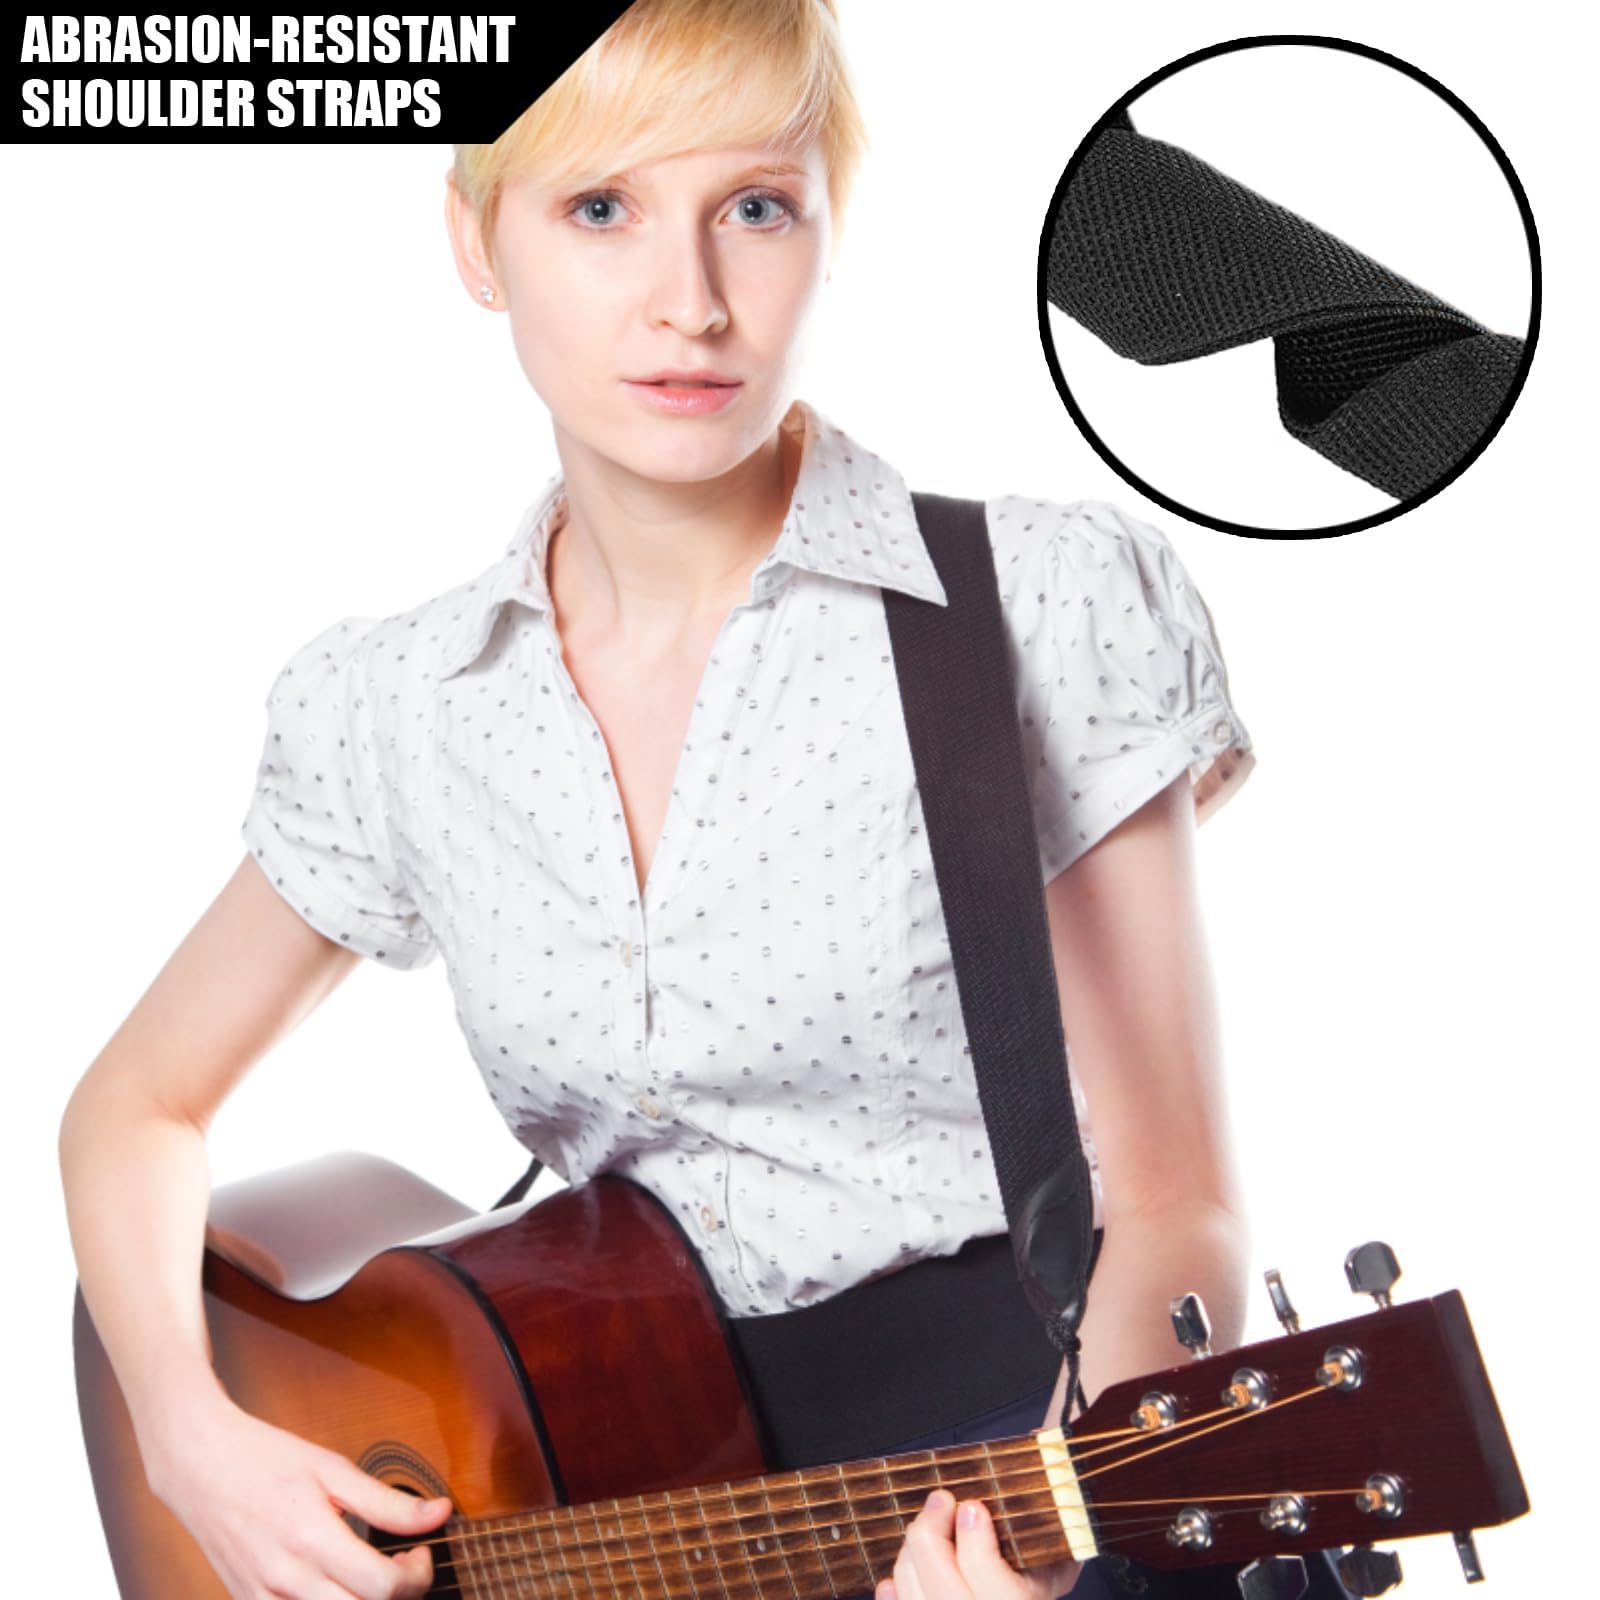 1Pcs Guitar Straps Soft Comfortable Guitar Shoulder Strap Adjustable Bass Guitar Strap Offering Optimal Weight Distribution Ideal for Acoustic Bass and Electric Guitars Accessories (Black, 80-138cm)